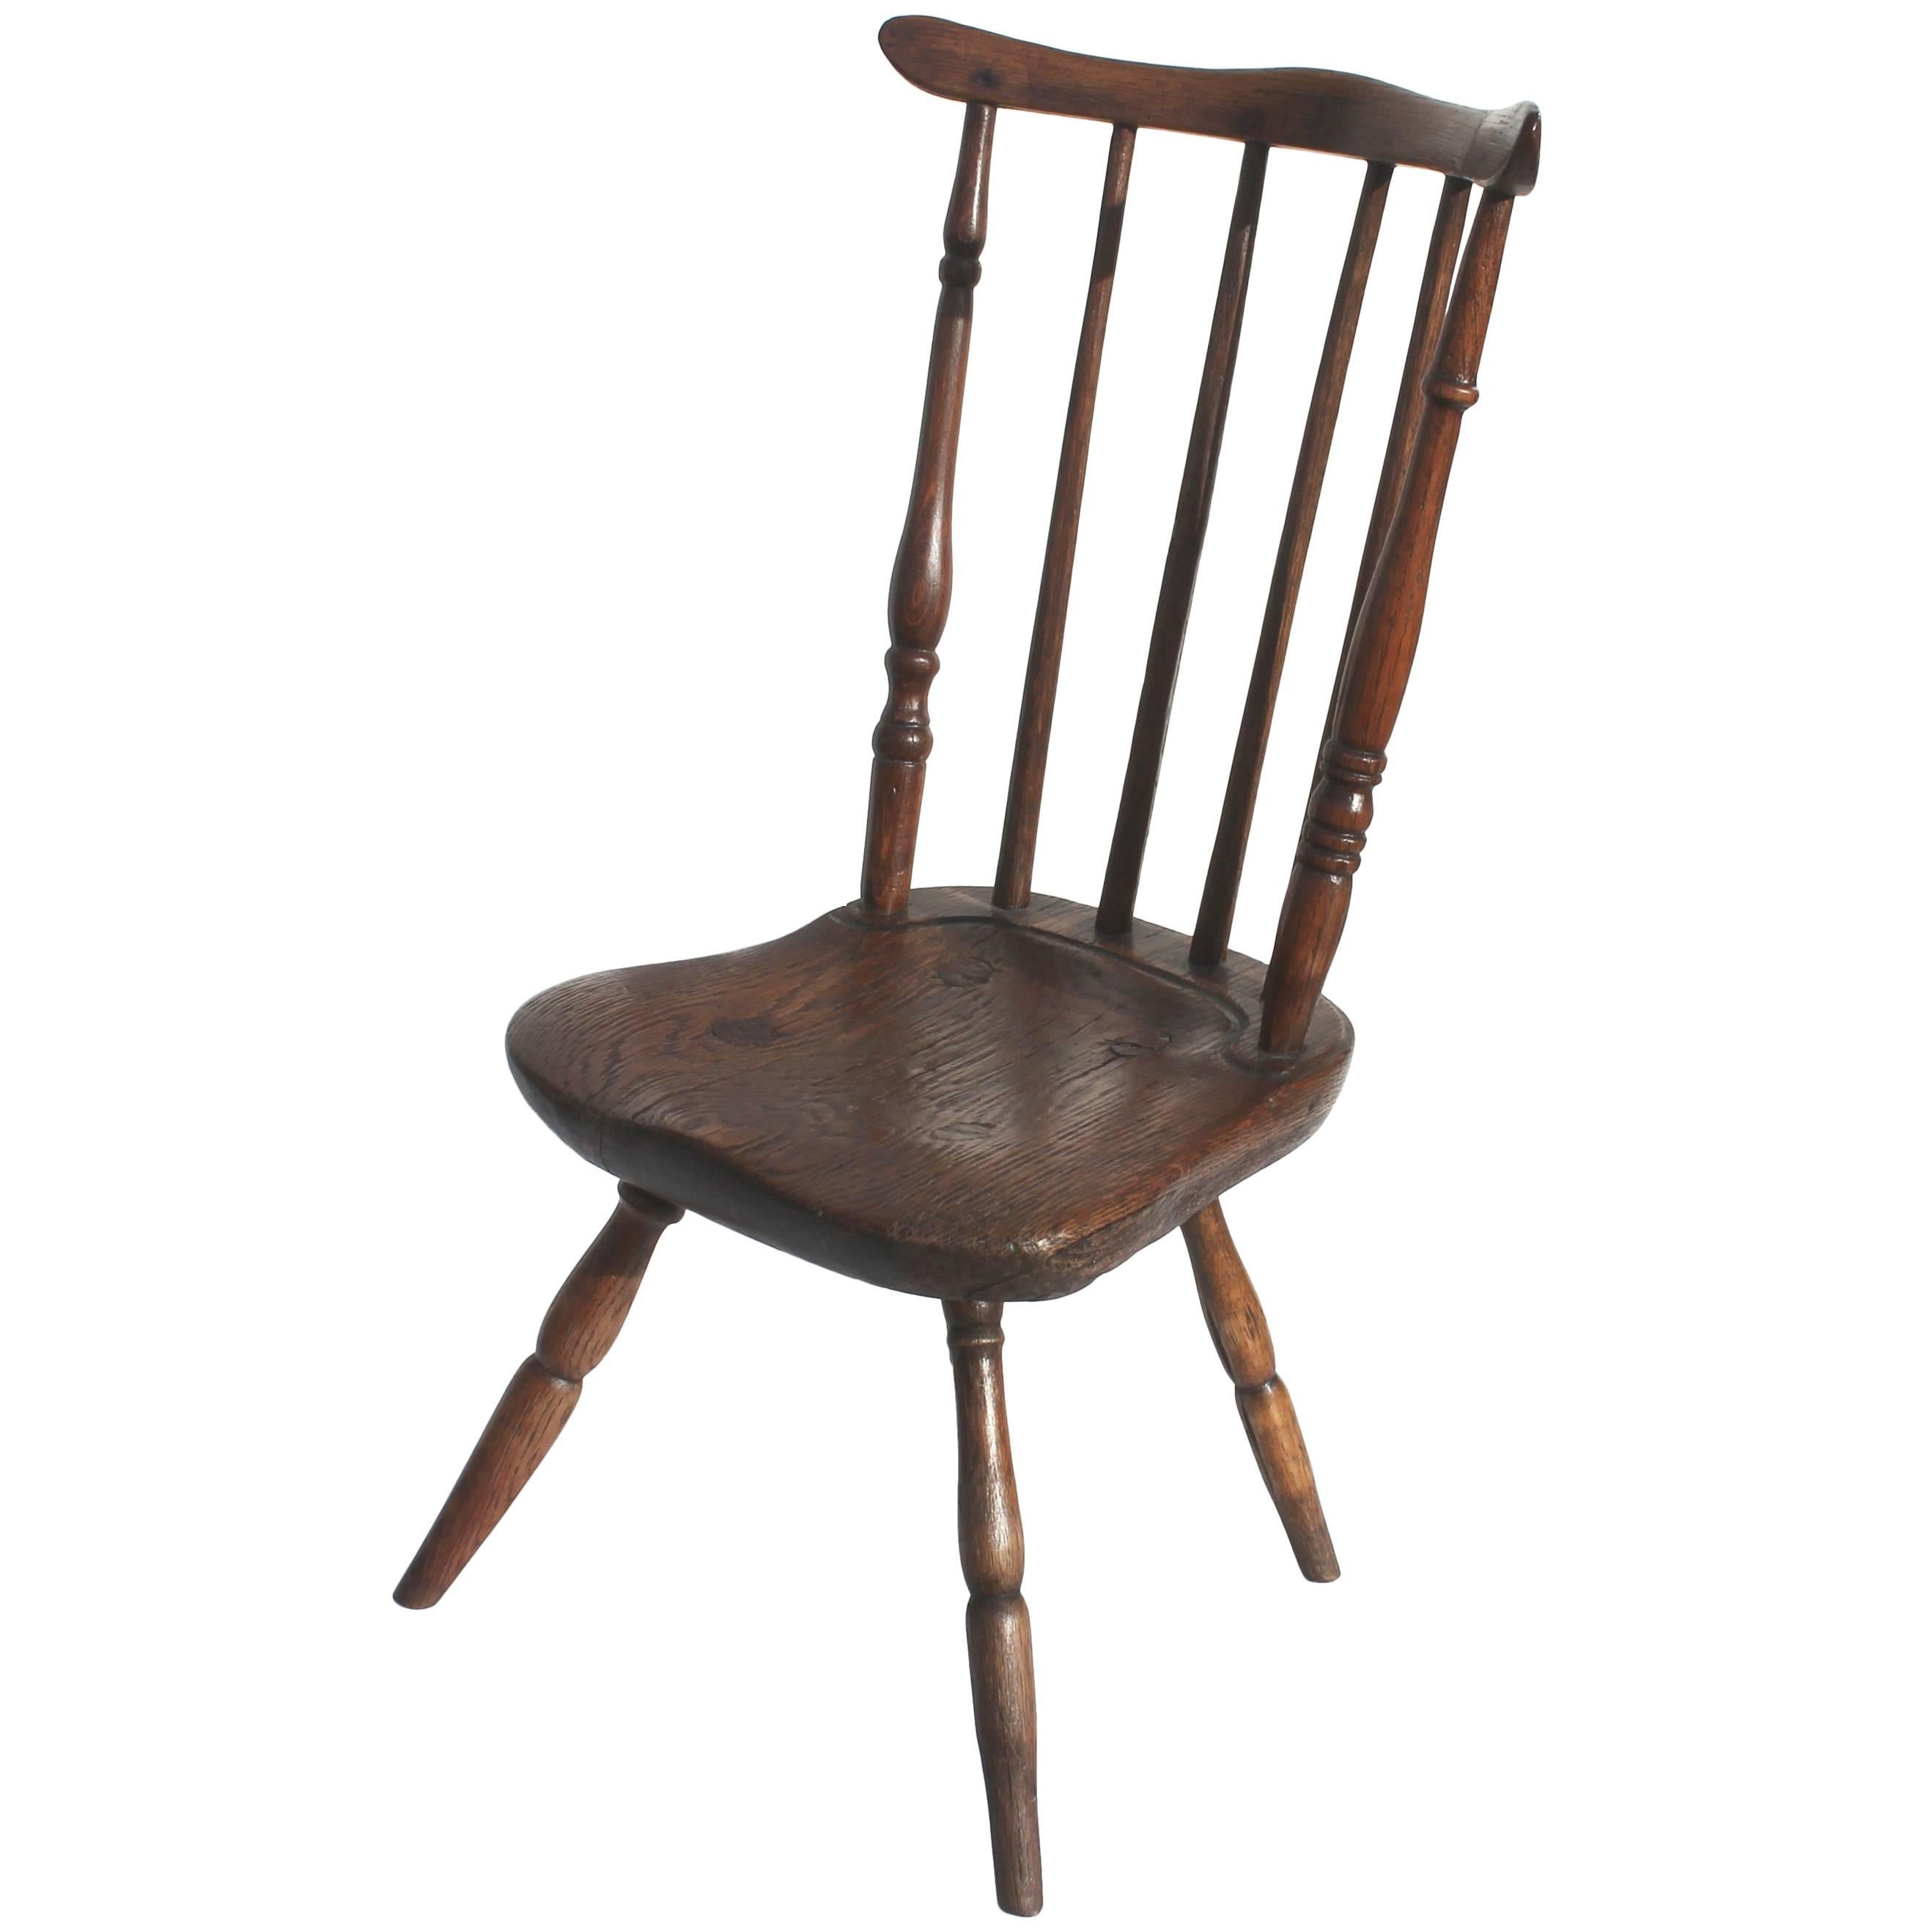 Early and Rare 19th Century Rare Child's Windsor Chair For Sale